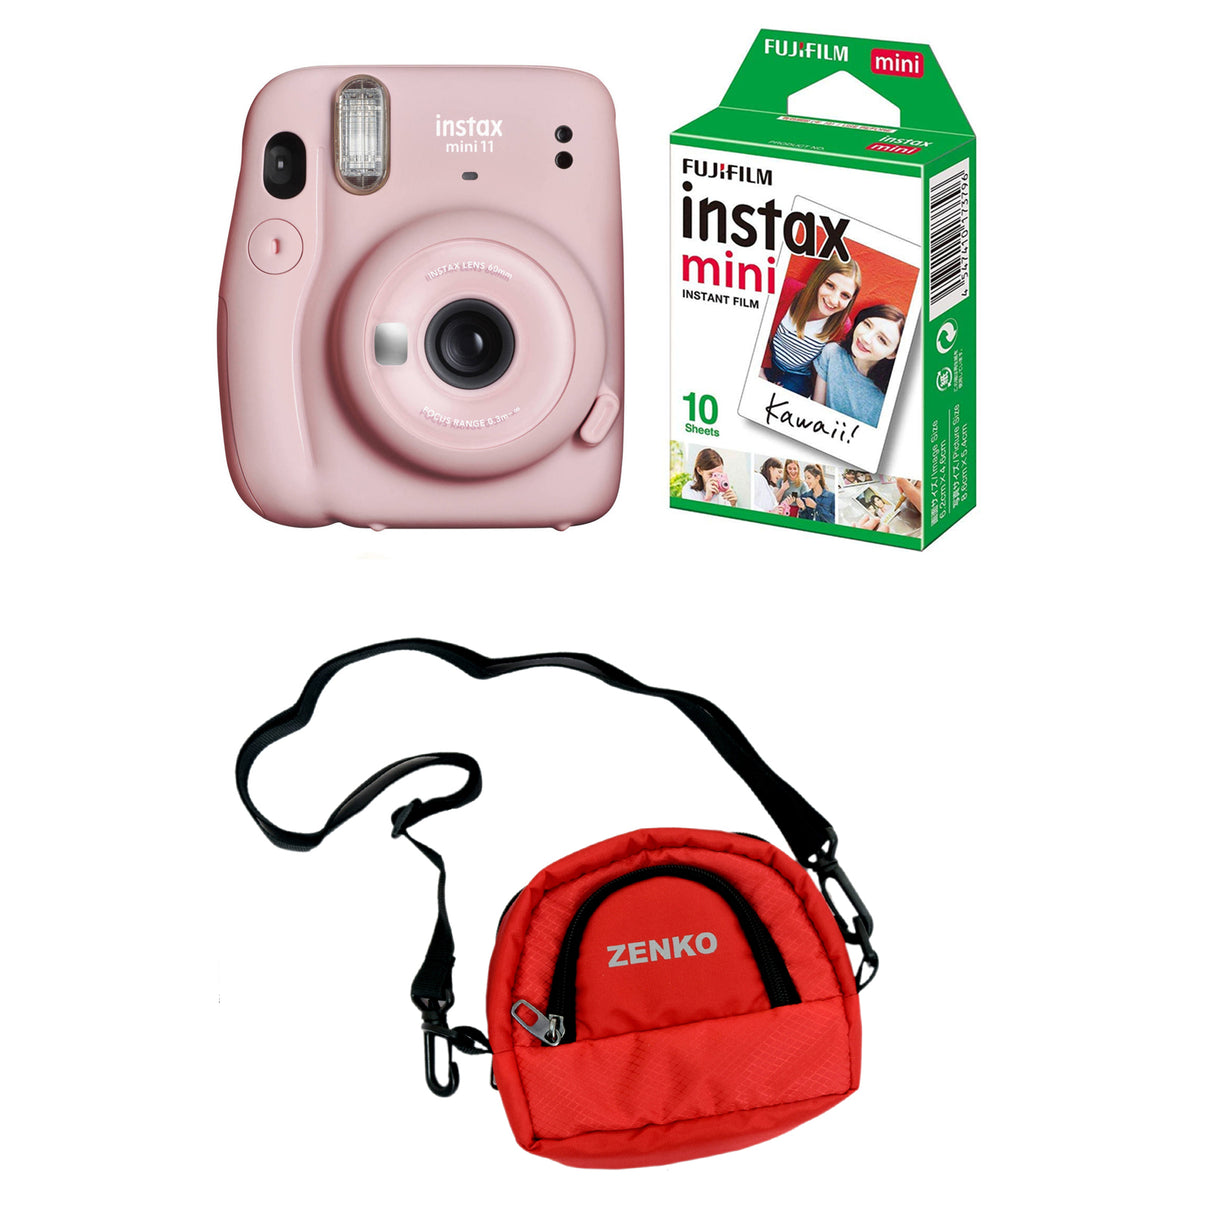 FUJIFILM INSTAX Mini 11 Instant Film Camera with 10X1 Pack of Instant Film With Red Pouch Kit (10 Exposures) Blush Pink